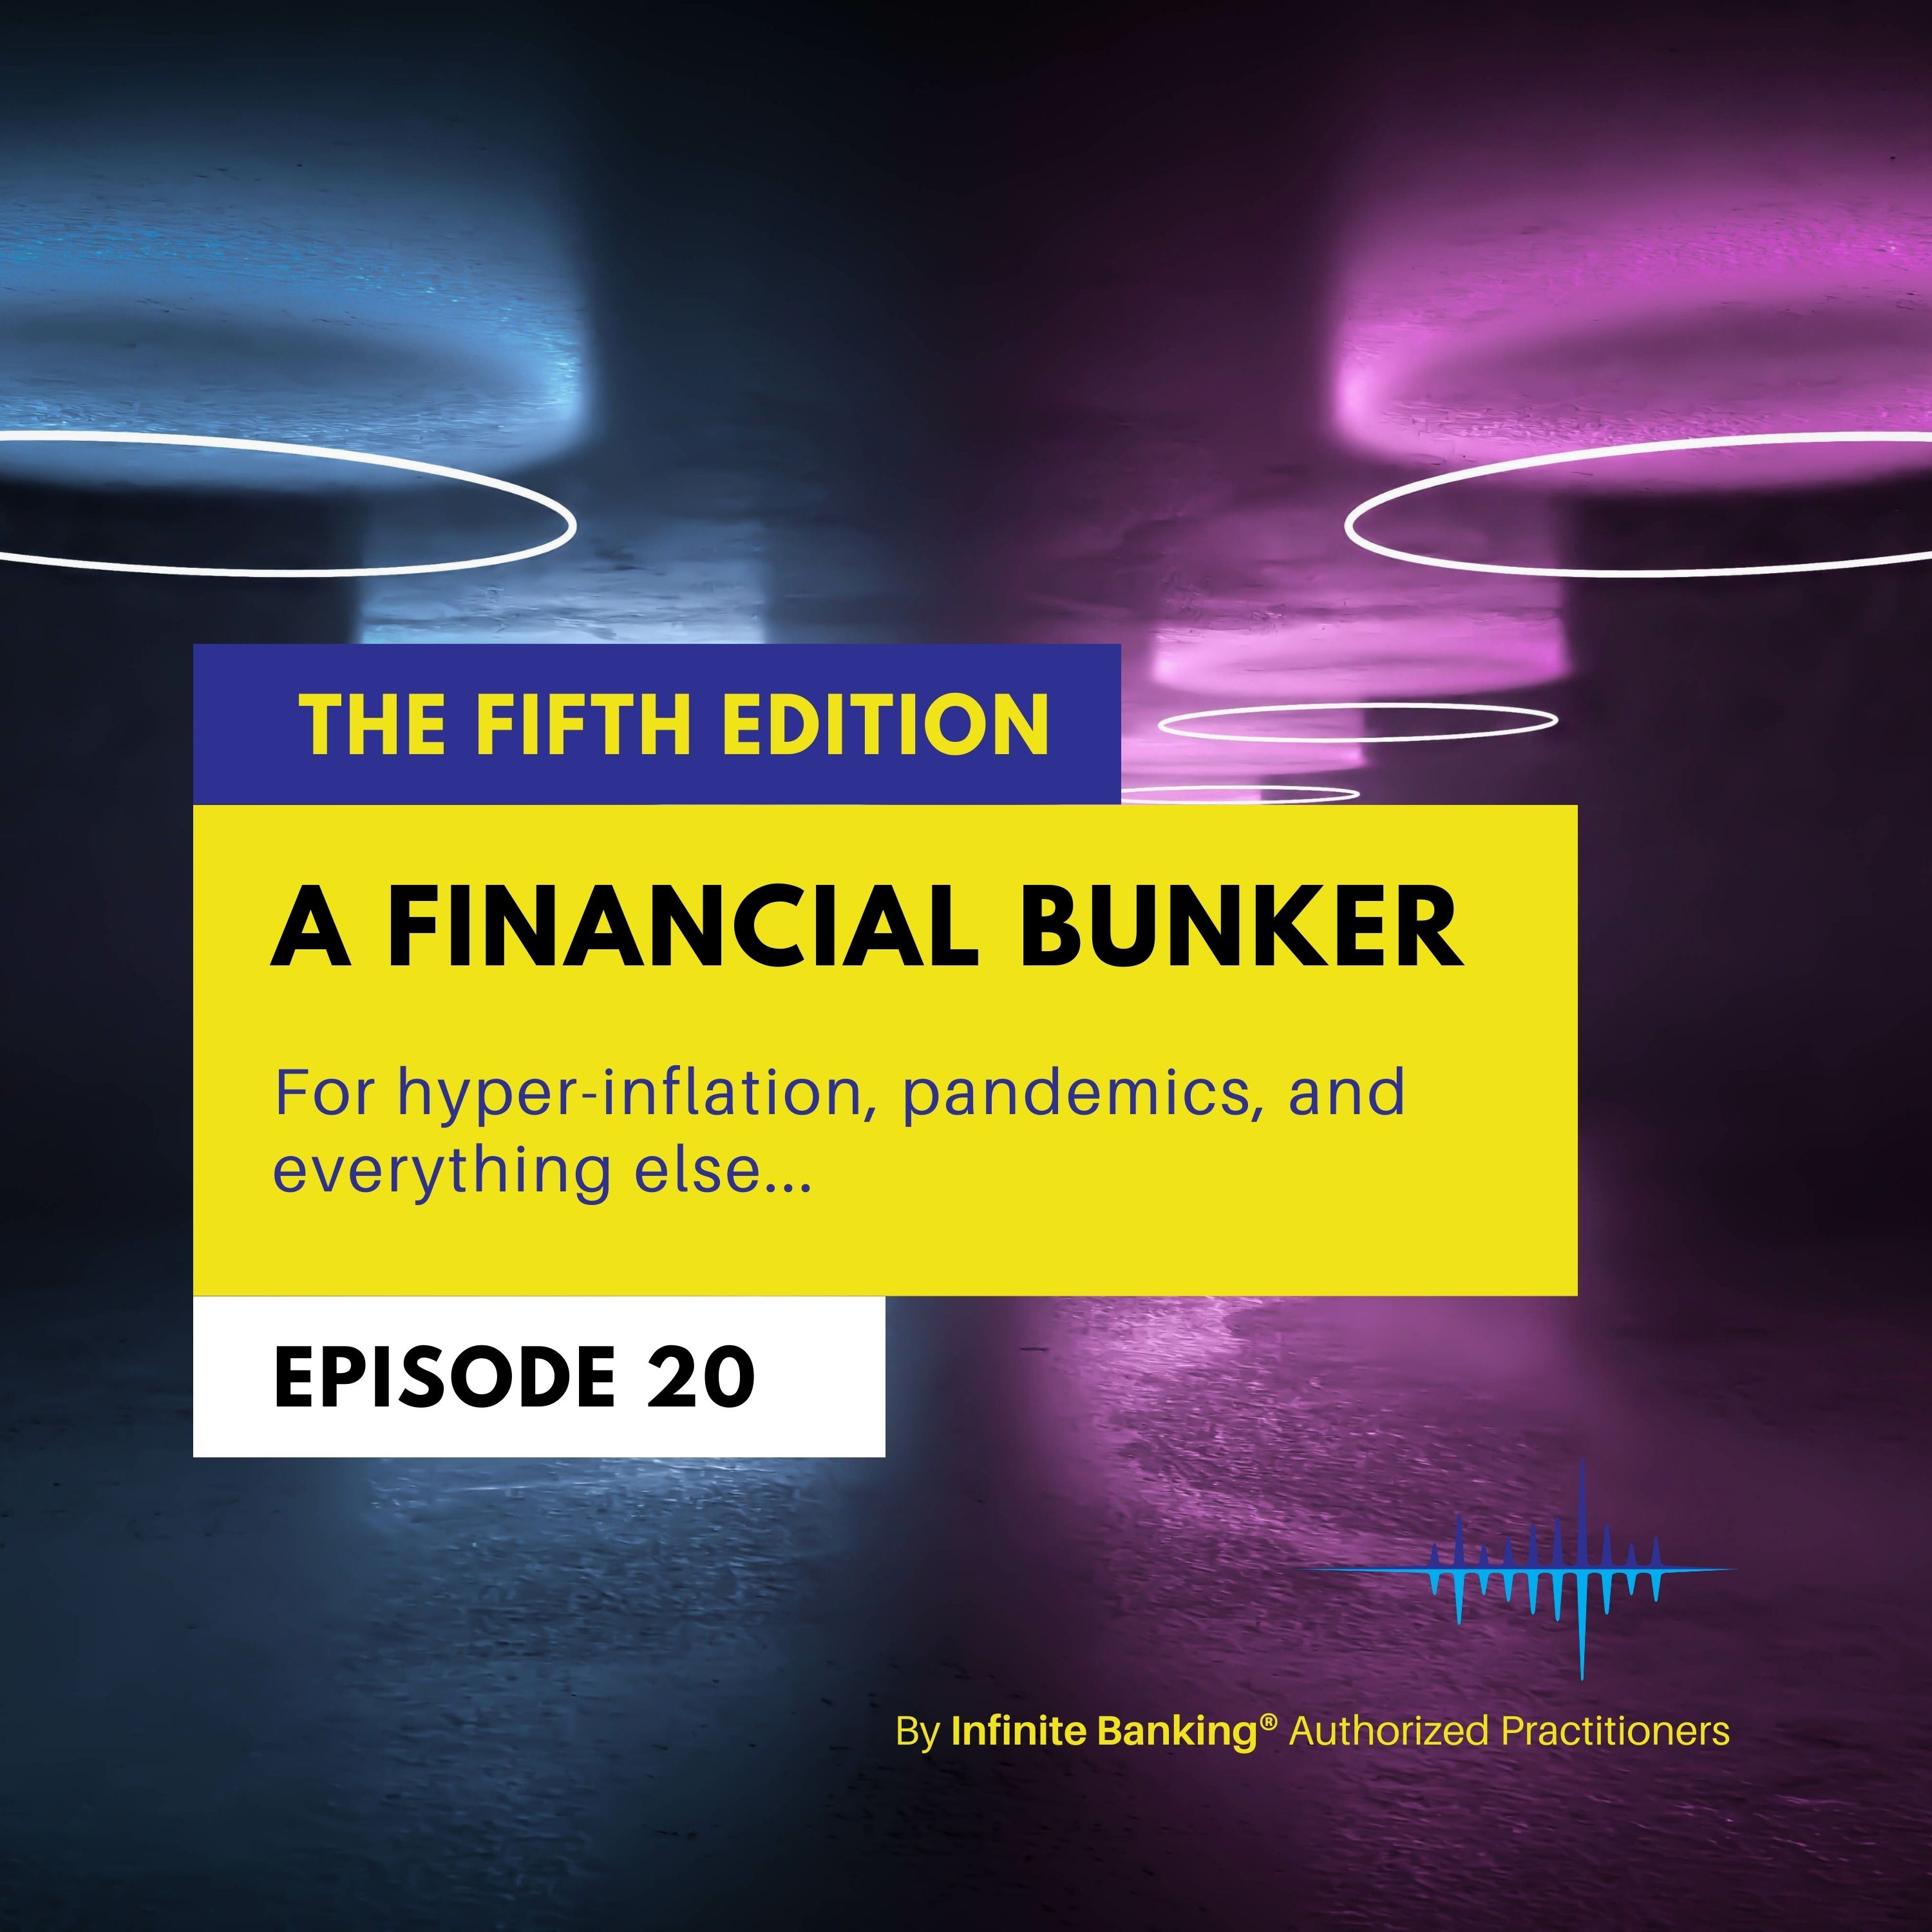 A Financial Bunker For Hyperinflation, Pandemics, and Everything Else Image